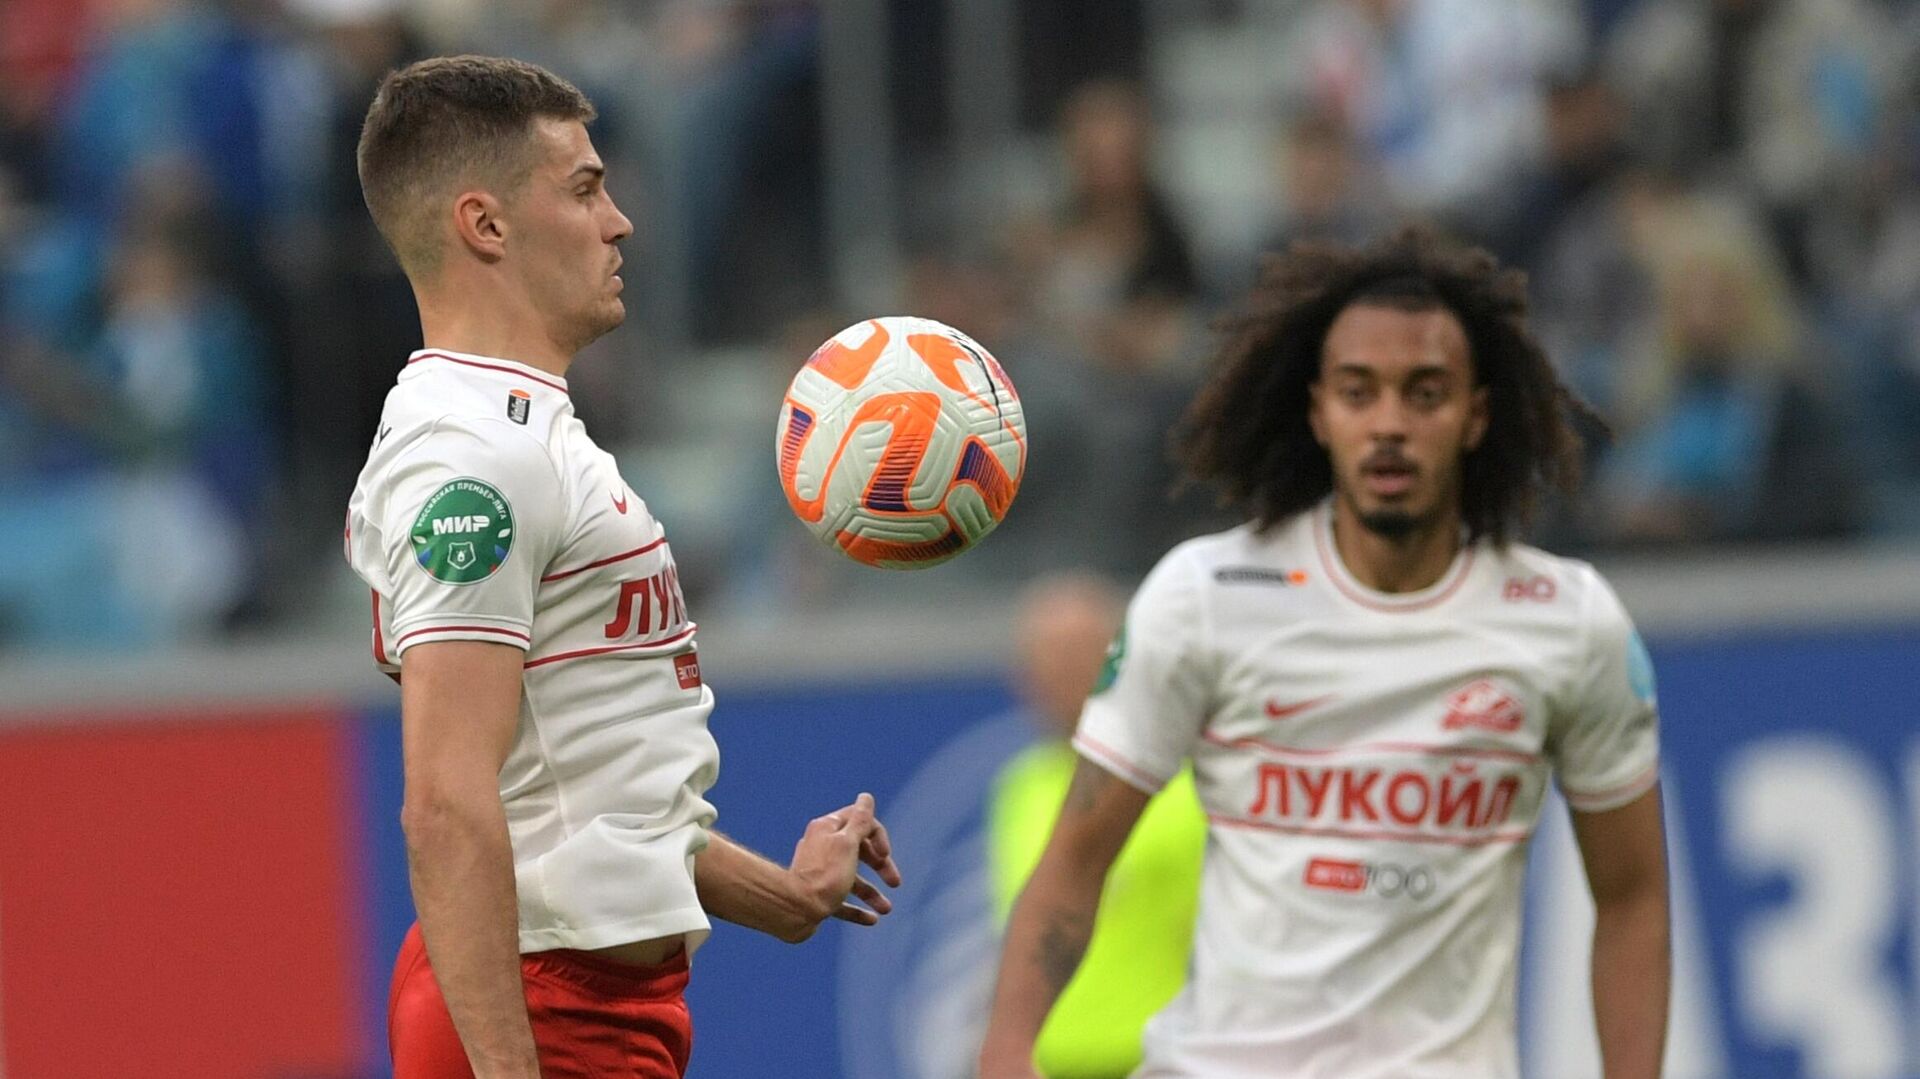 Spartak players Roman Zobnin (left) and Tomas Tavares in the match of the 26th round of the Russian Football Championship between FC Zenit (St. Petersburg) and FC Spartak (Moscow) between the clubs of the 2022/2023 Premier League season.  -RIA Novosti, 1920, 05/07/2023